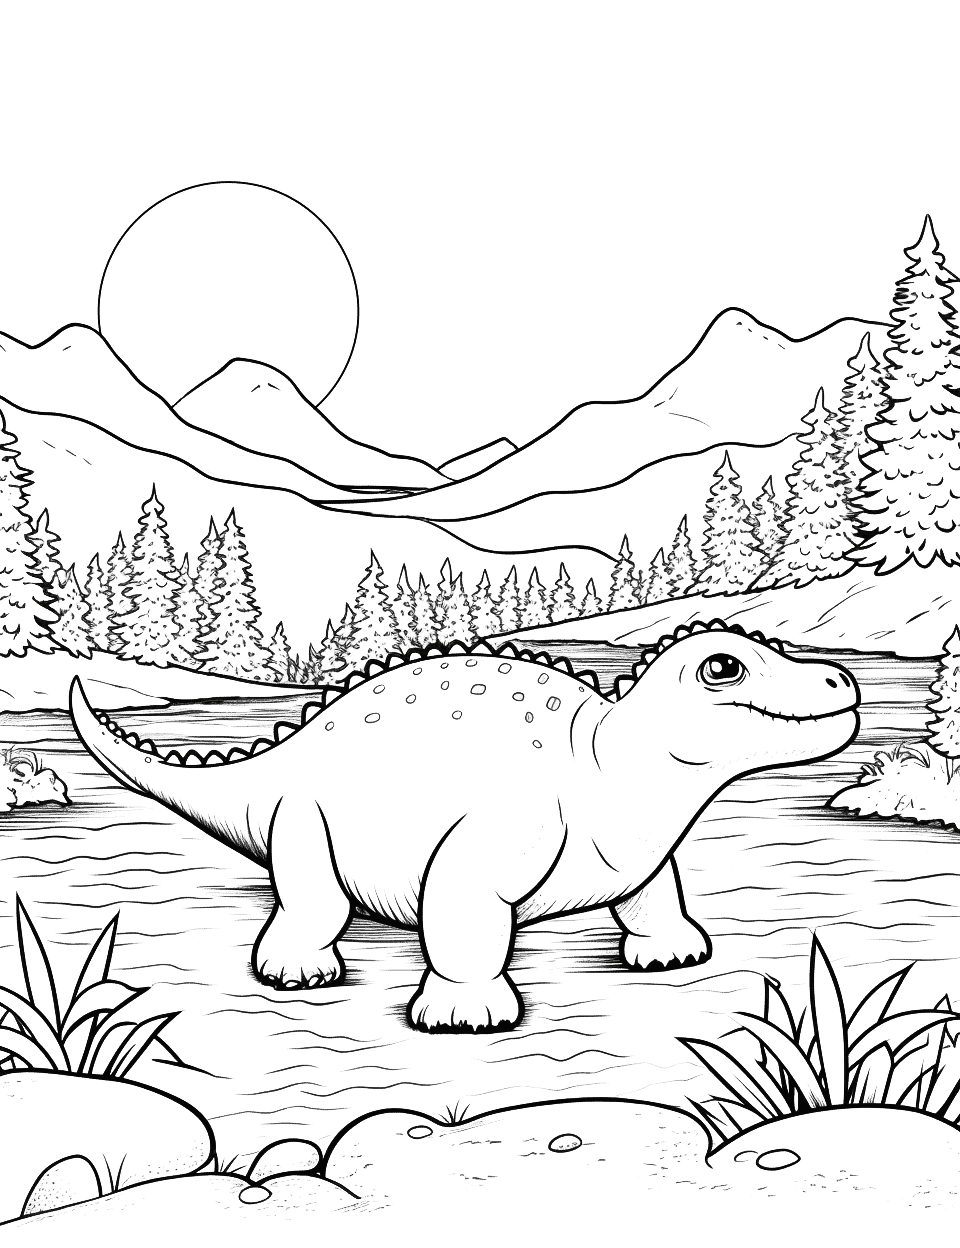 Ankylosaurus Crossing a River Coloring Page - An Ankylosaurus and its baby crossing a prehistoric river.